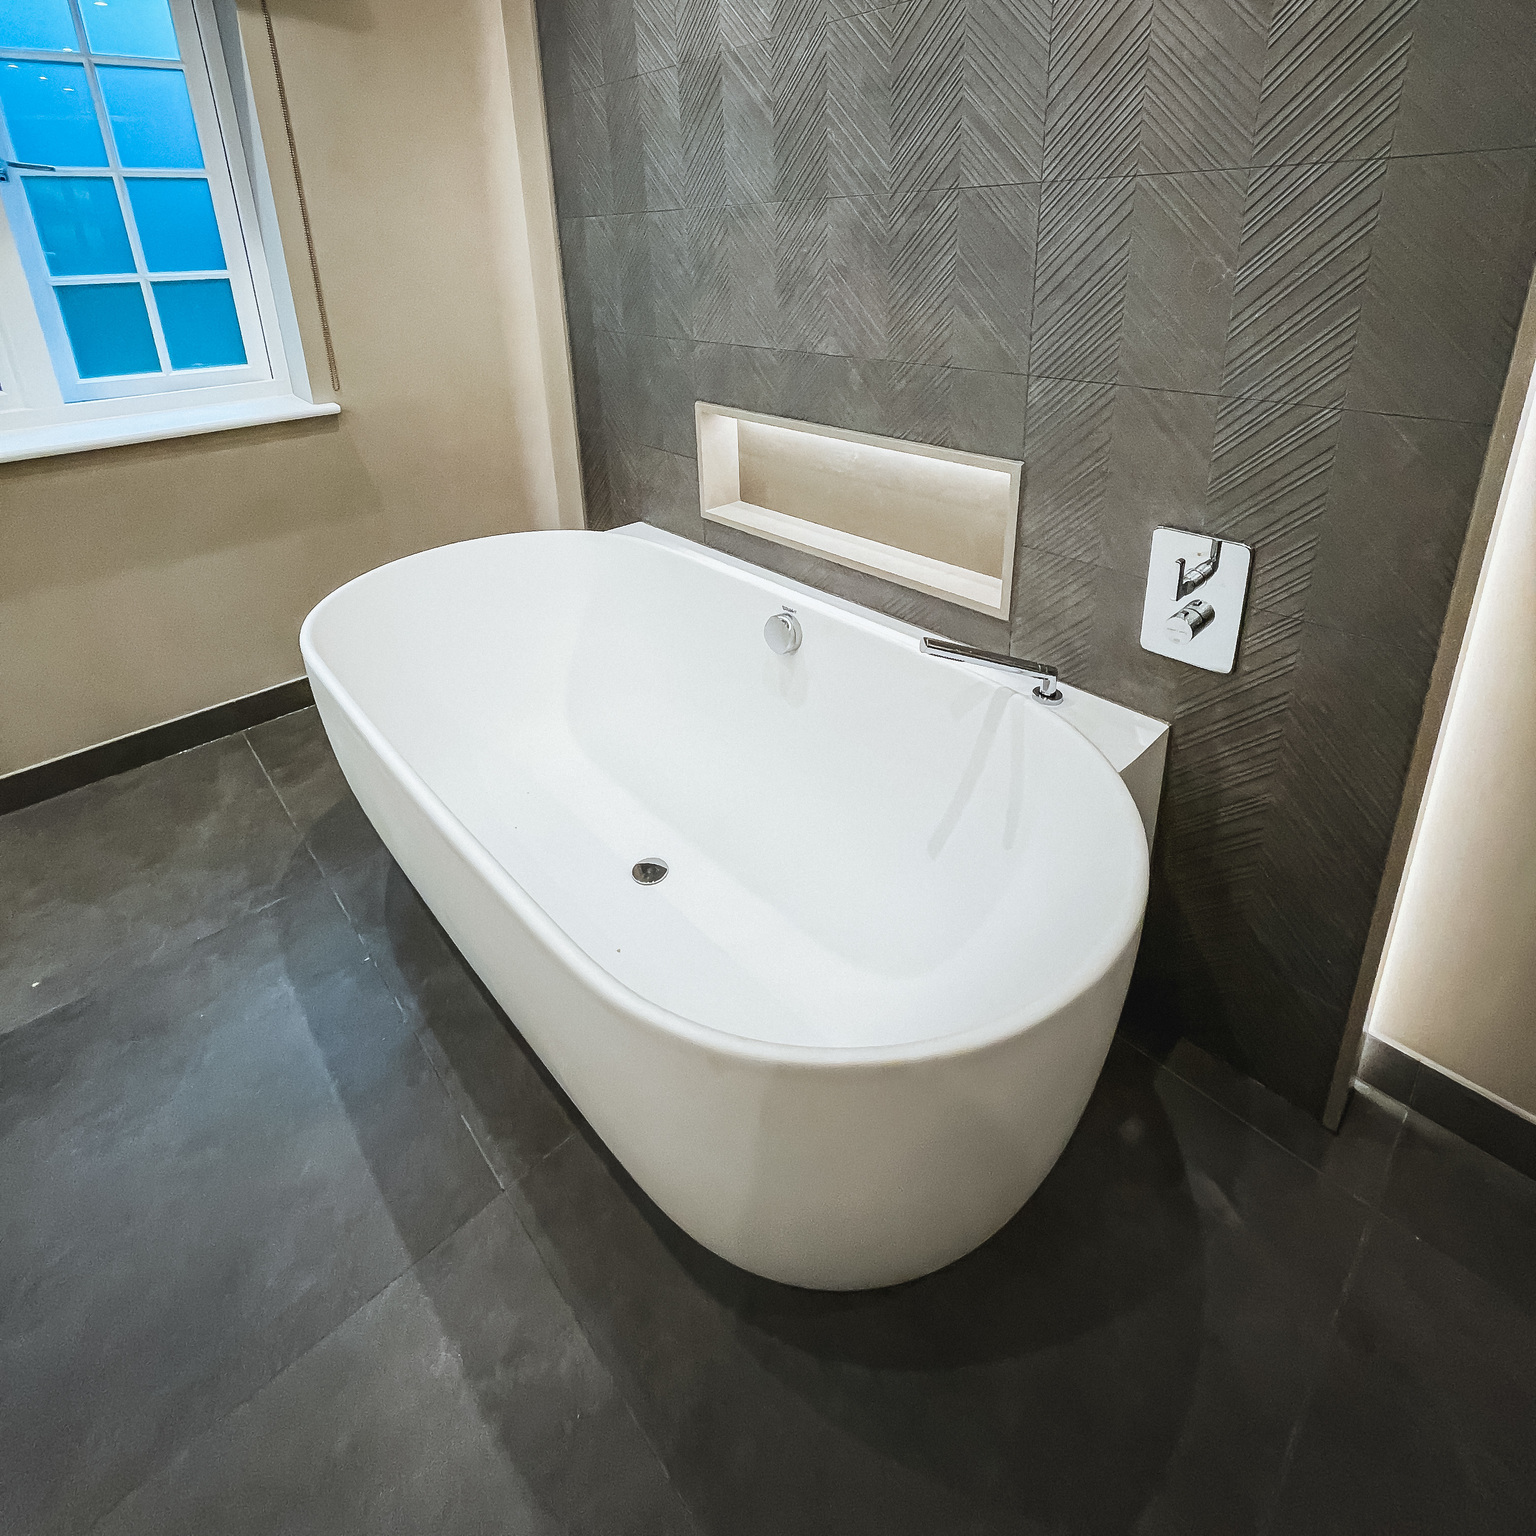 Bath in a residential property